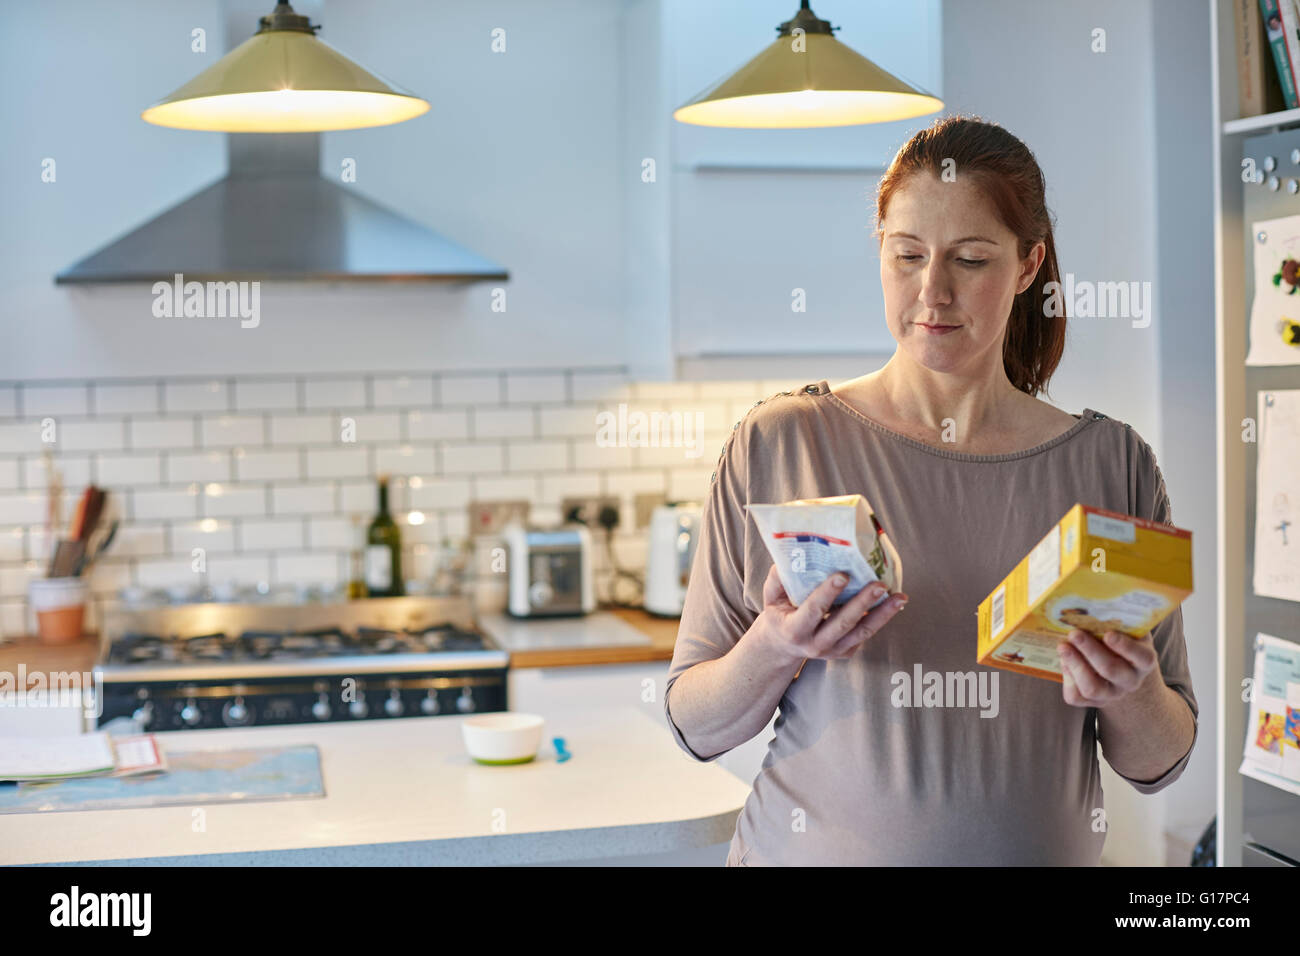 Pregnant woman in kitchen comparing food packets Stock Photo